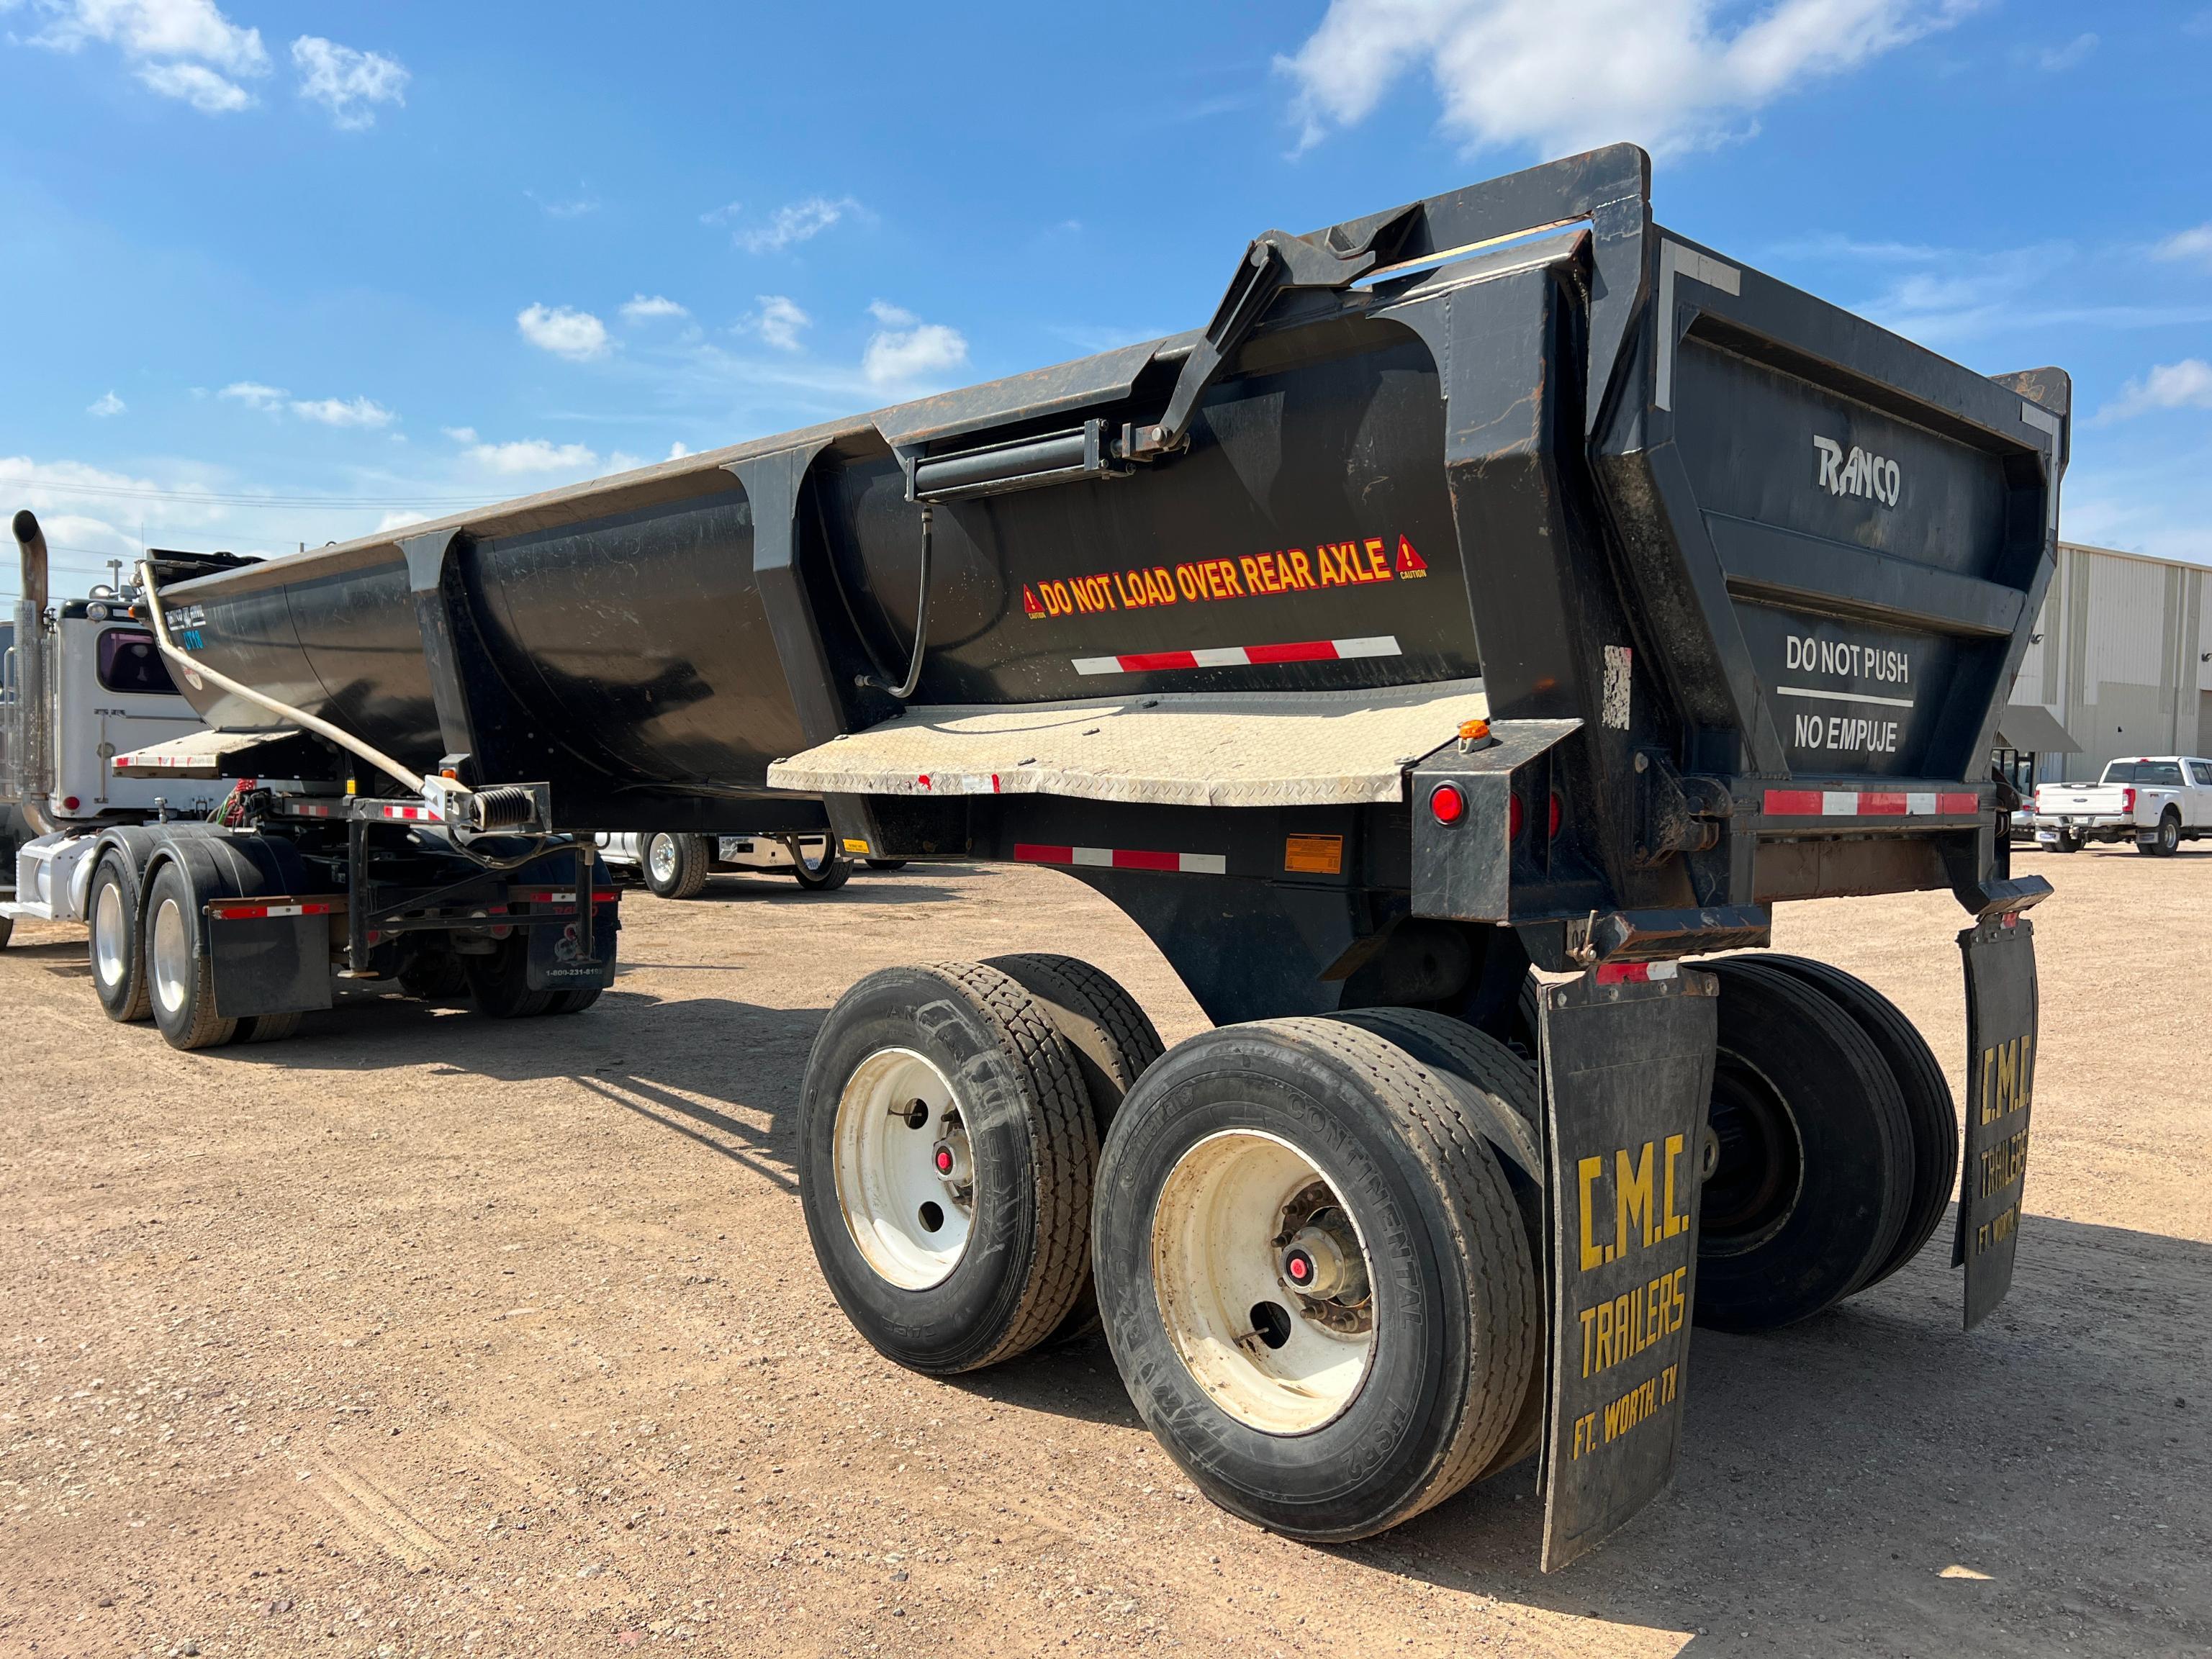 2017 RANCO ED26-34 DUMP TRAILER VN:1UNSD3424HL153144 equipped with 34ft. Dump body, 26 yard